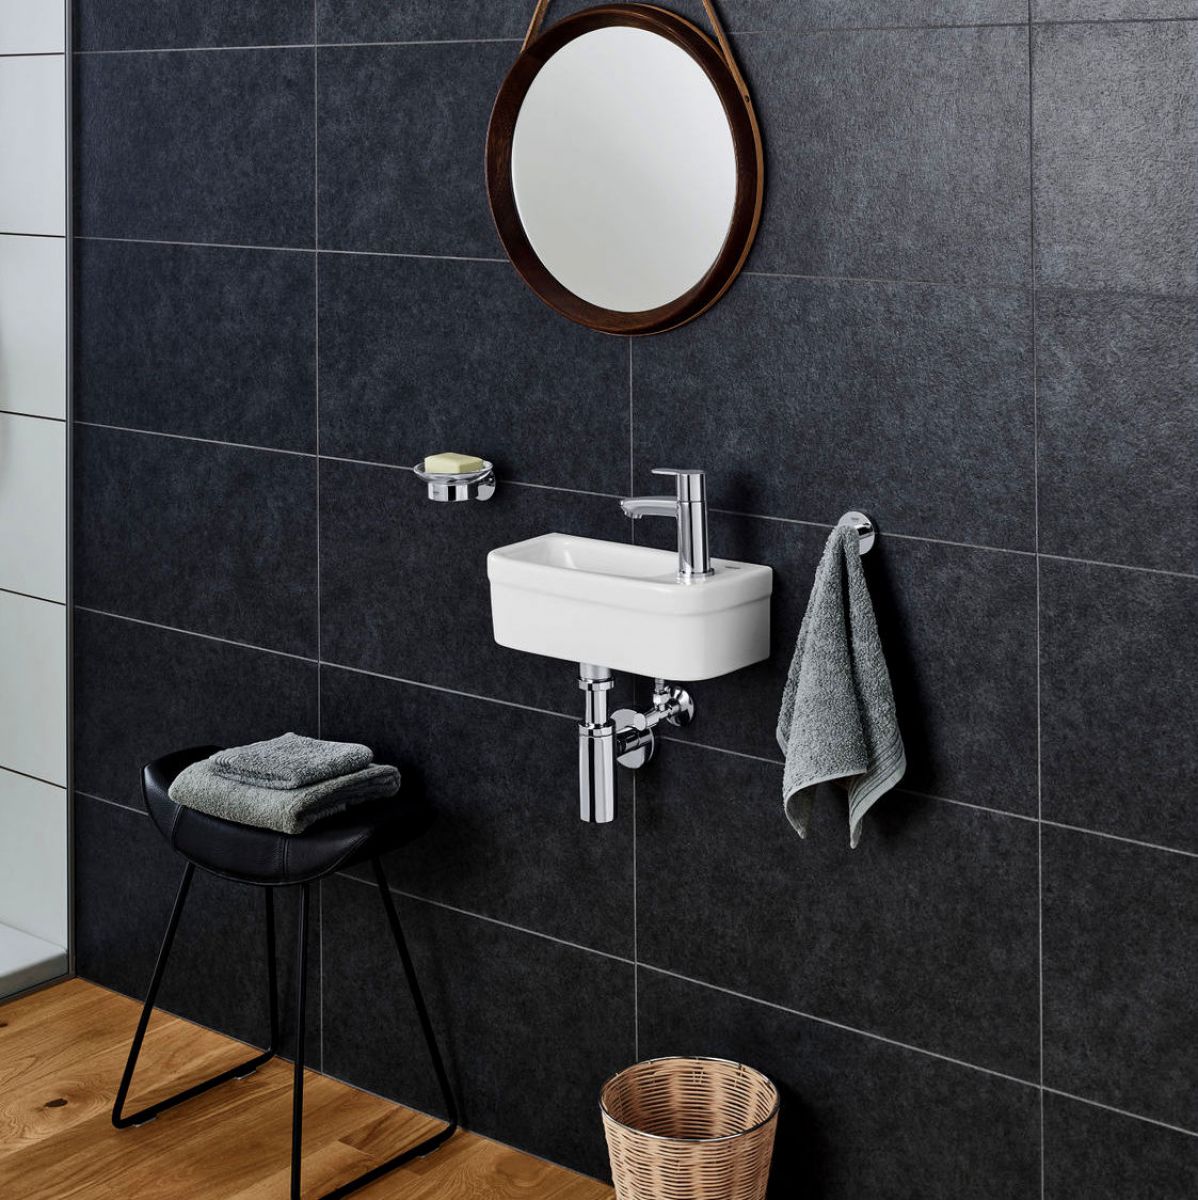 image example of a cloakroom basin